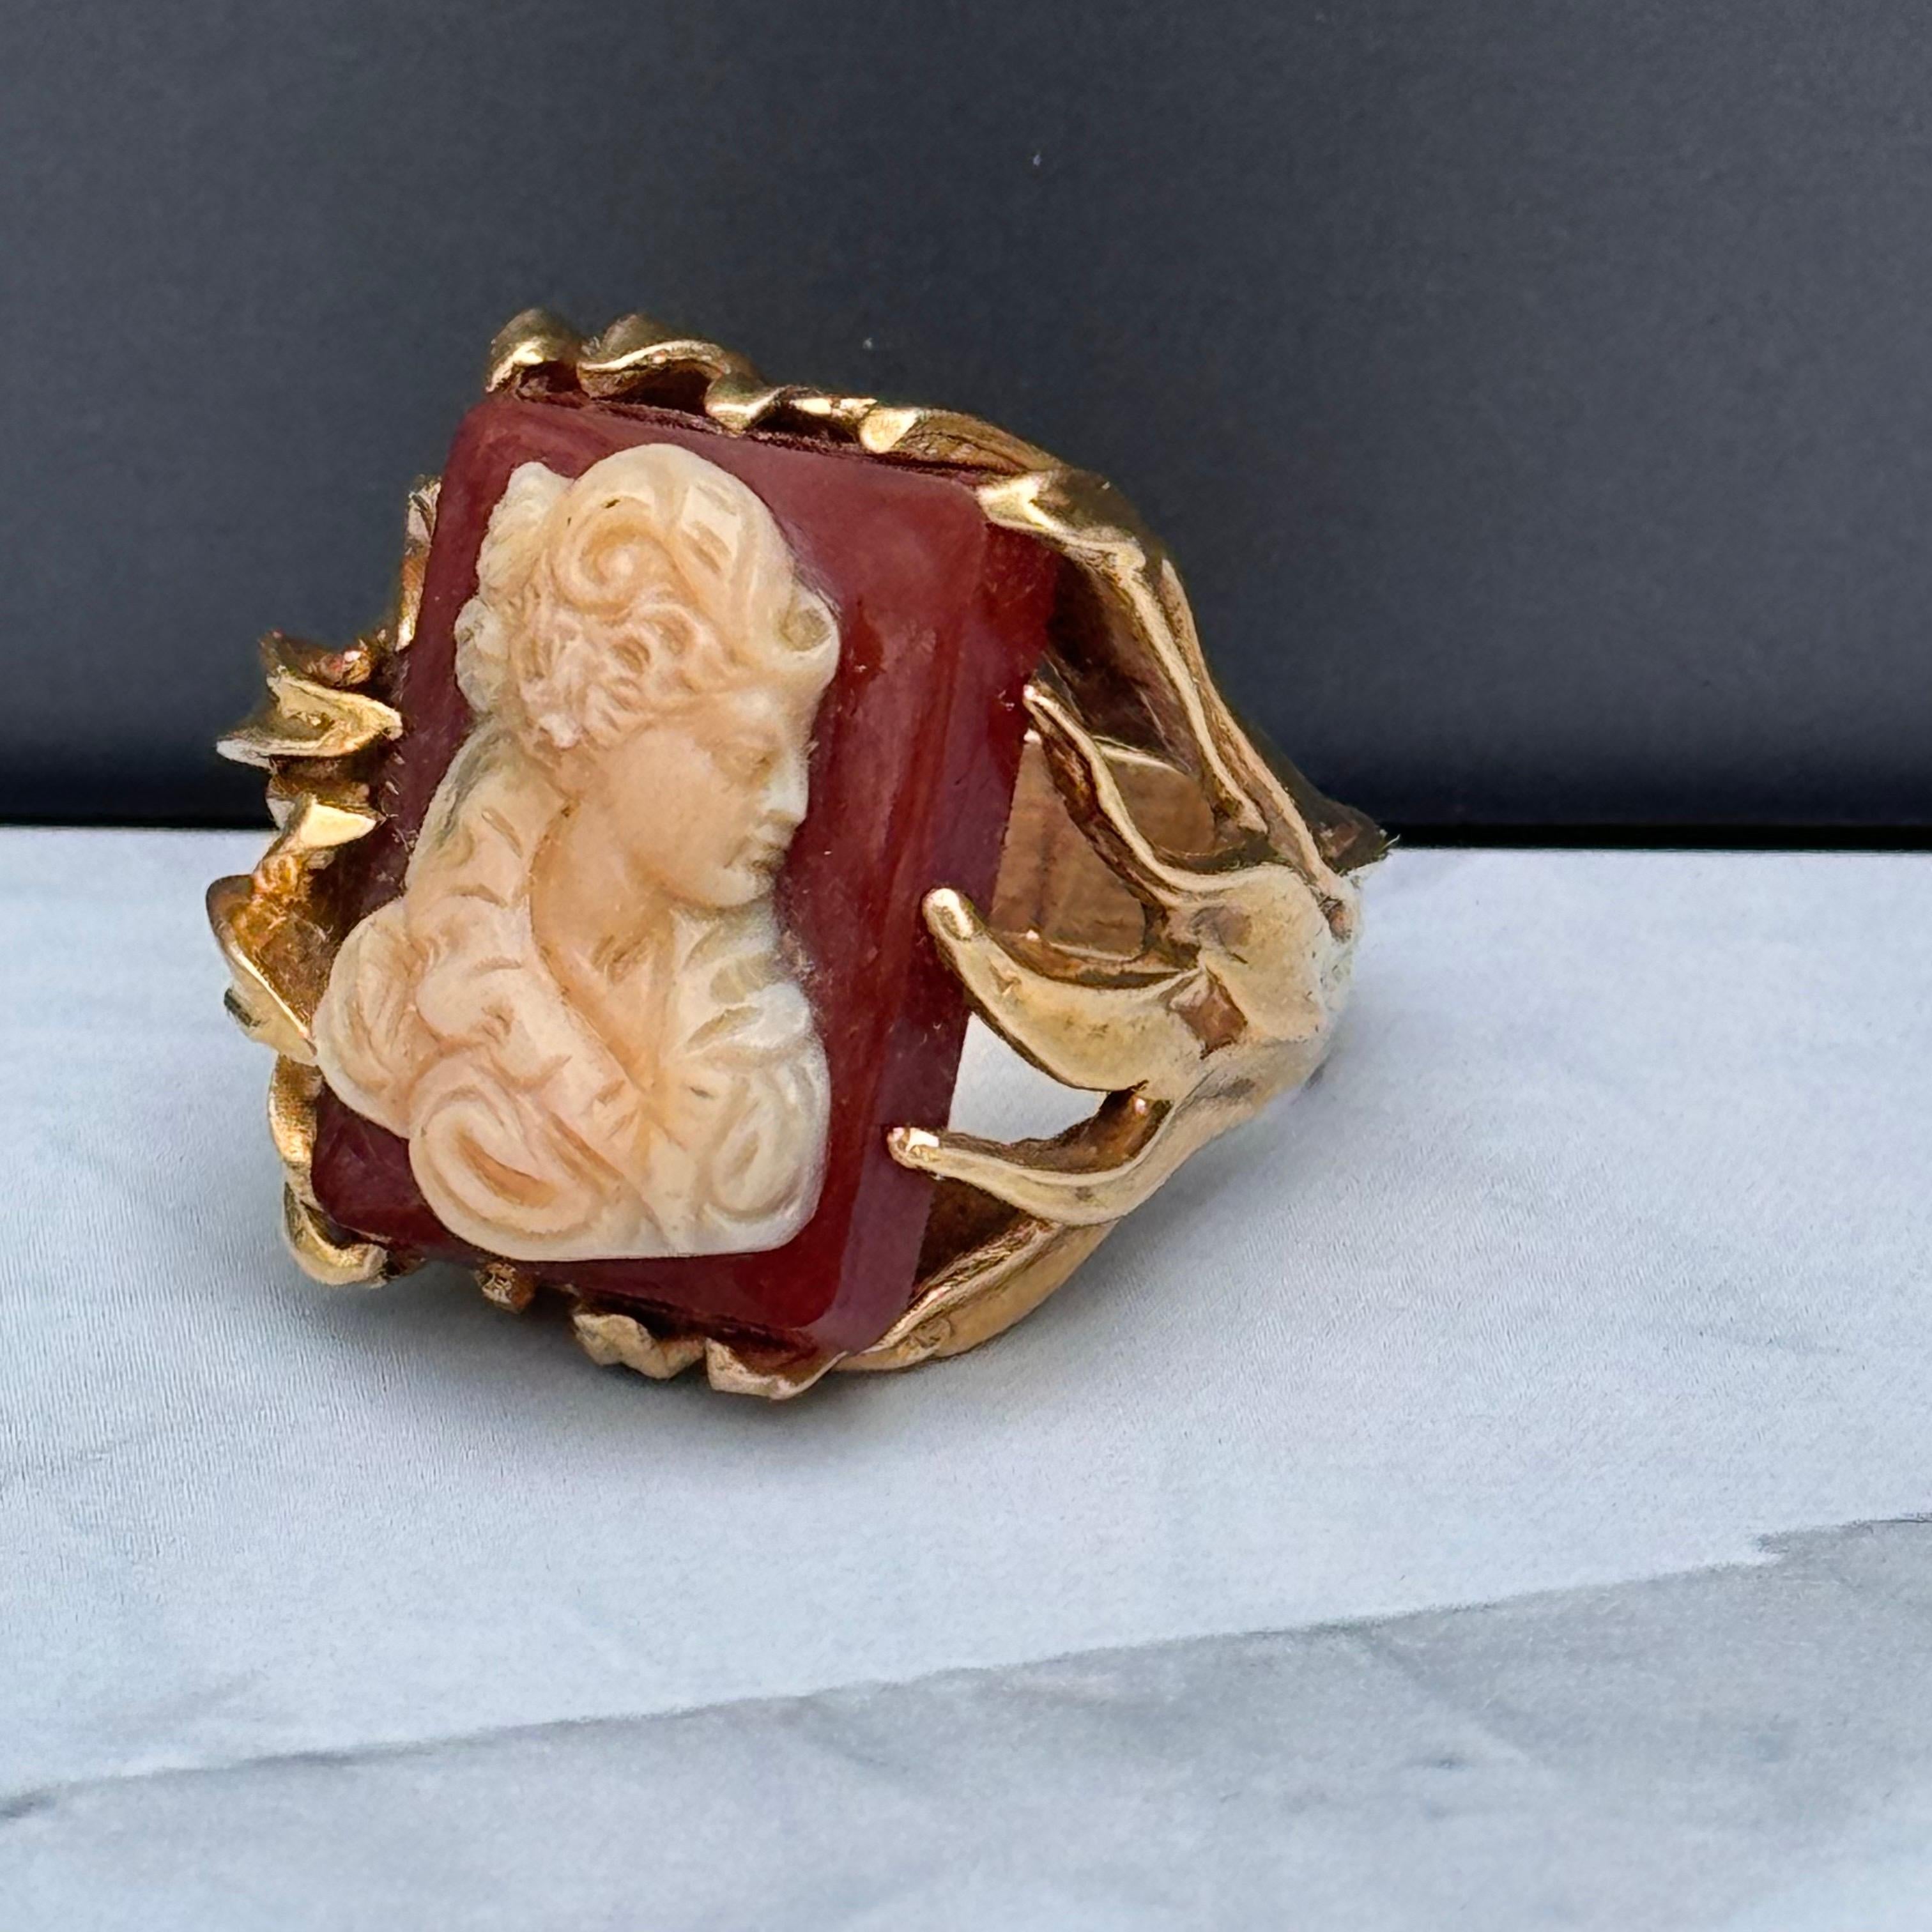 The Vintage Hard Stone Cameo Dinner Ring is an elegant piece crafted in 14kt gold, featuring a beautifully deeply carved hard stone Female Bust cameo  set on a nice organic leaf design band. Its intricate design adds a touch of sophistication,